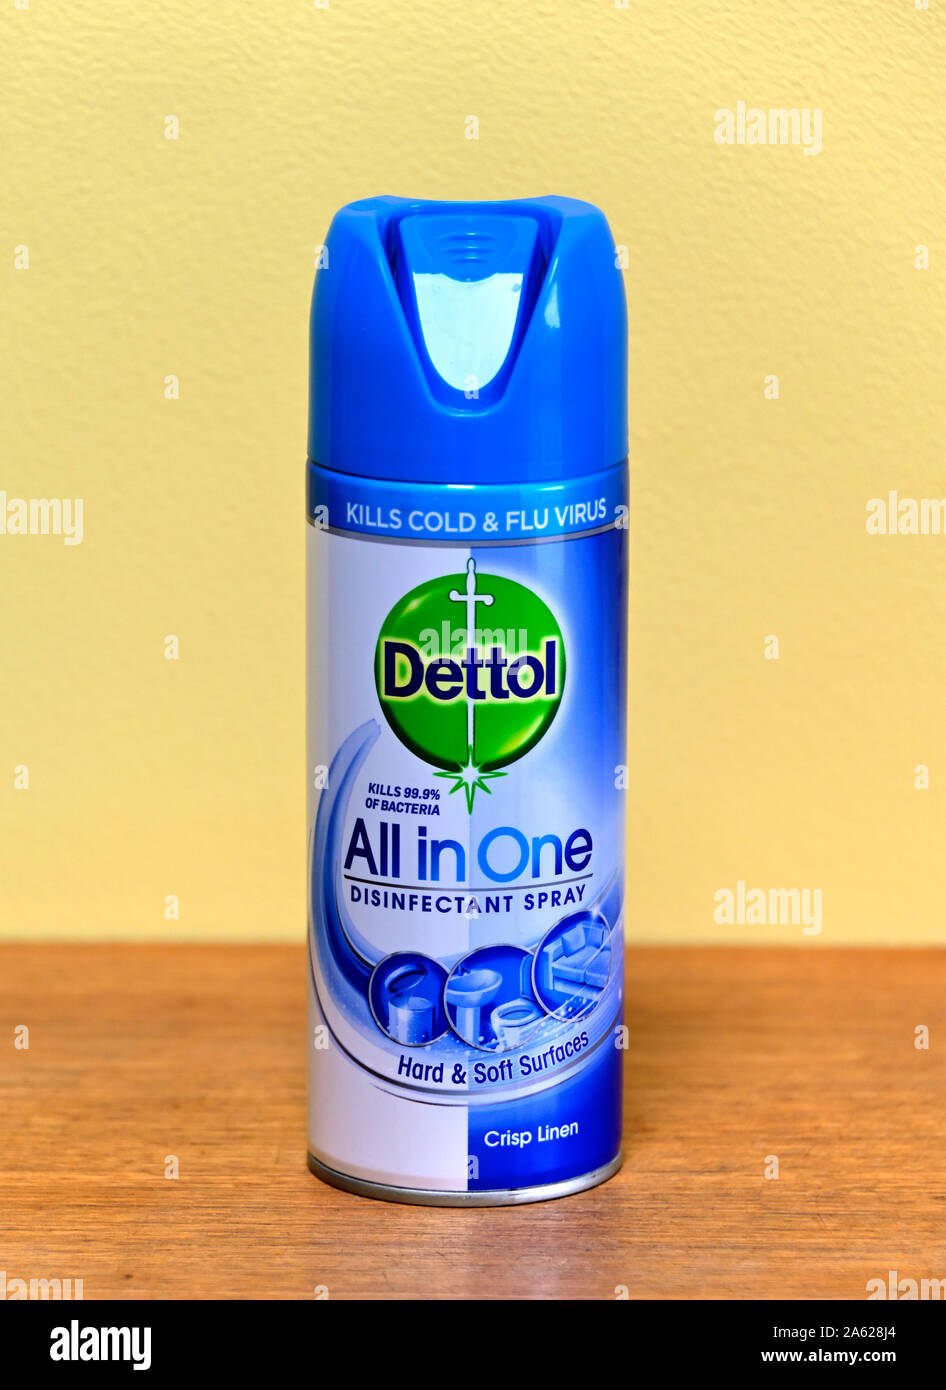 Aerosol container of Dettol All in one Disinfectant Spray. Hard and soft surfaces. Kills cold and flu virus. Crisp linen. Kills 99.9% of bacteria. Stock Photo